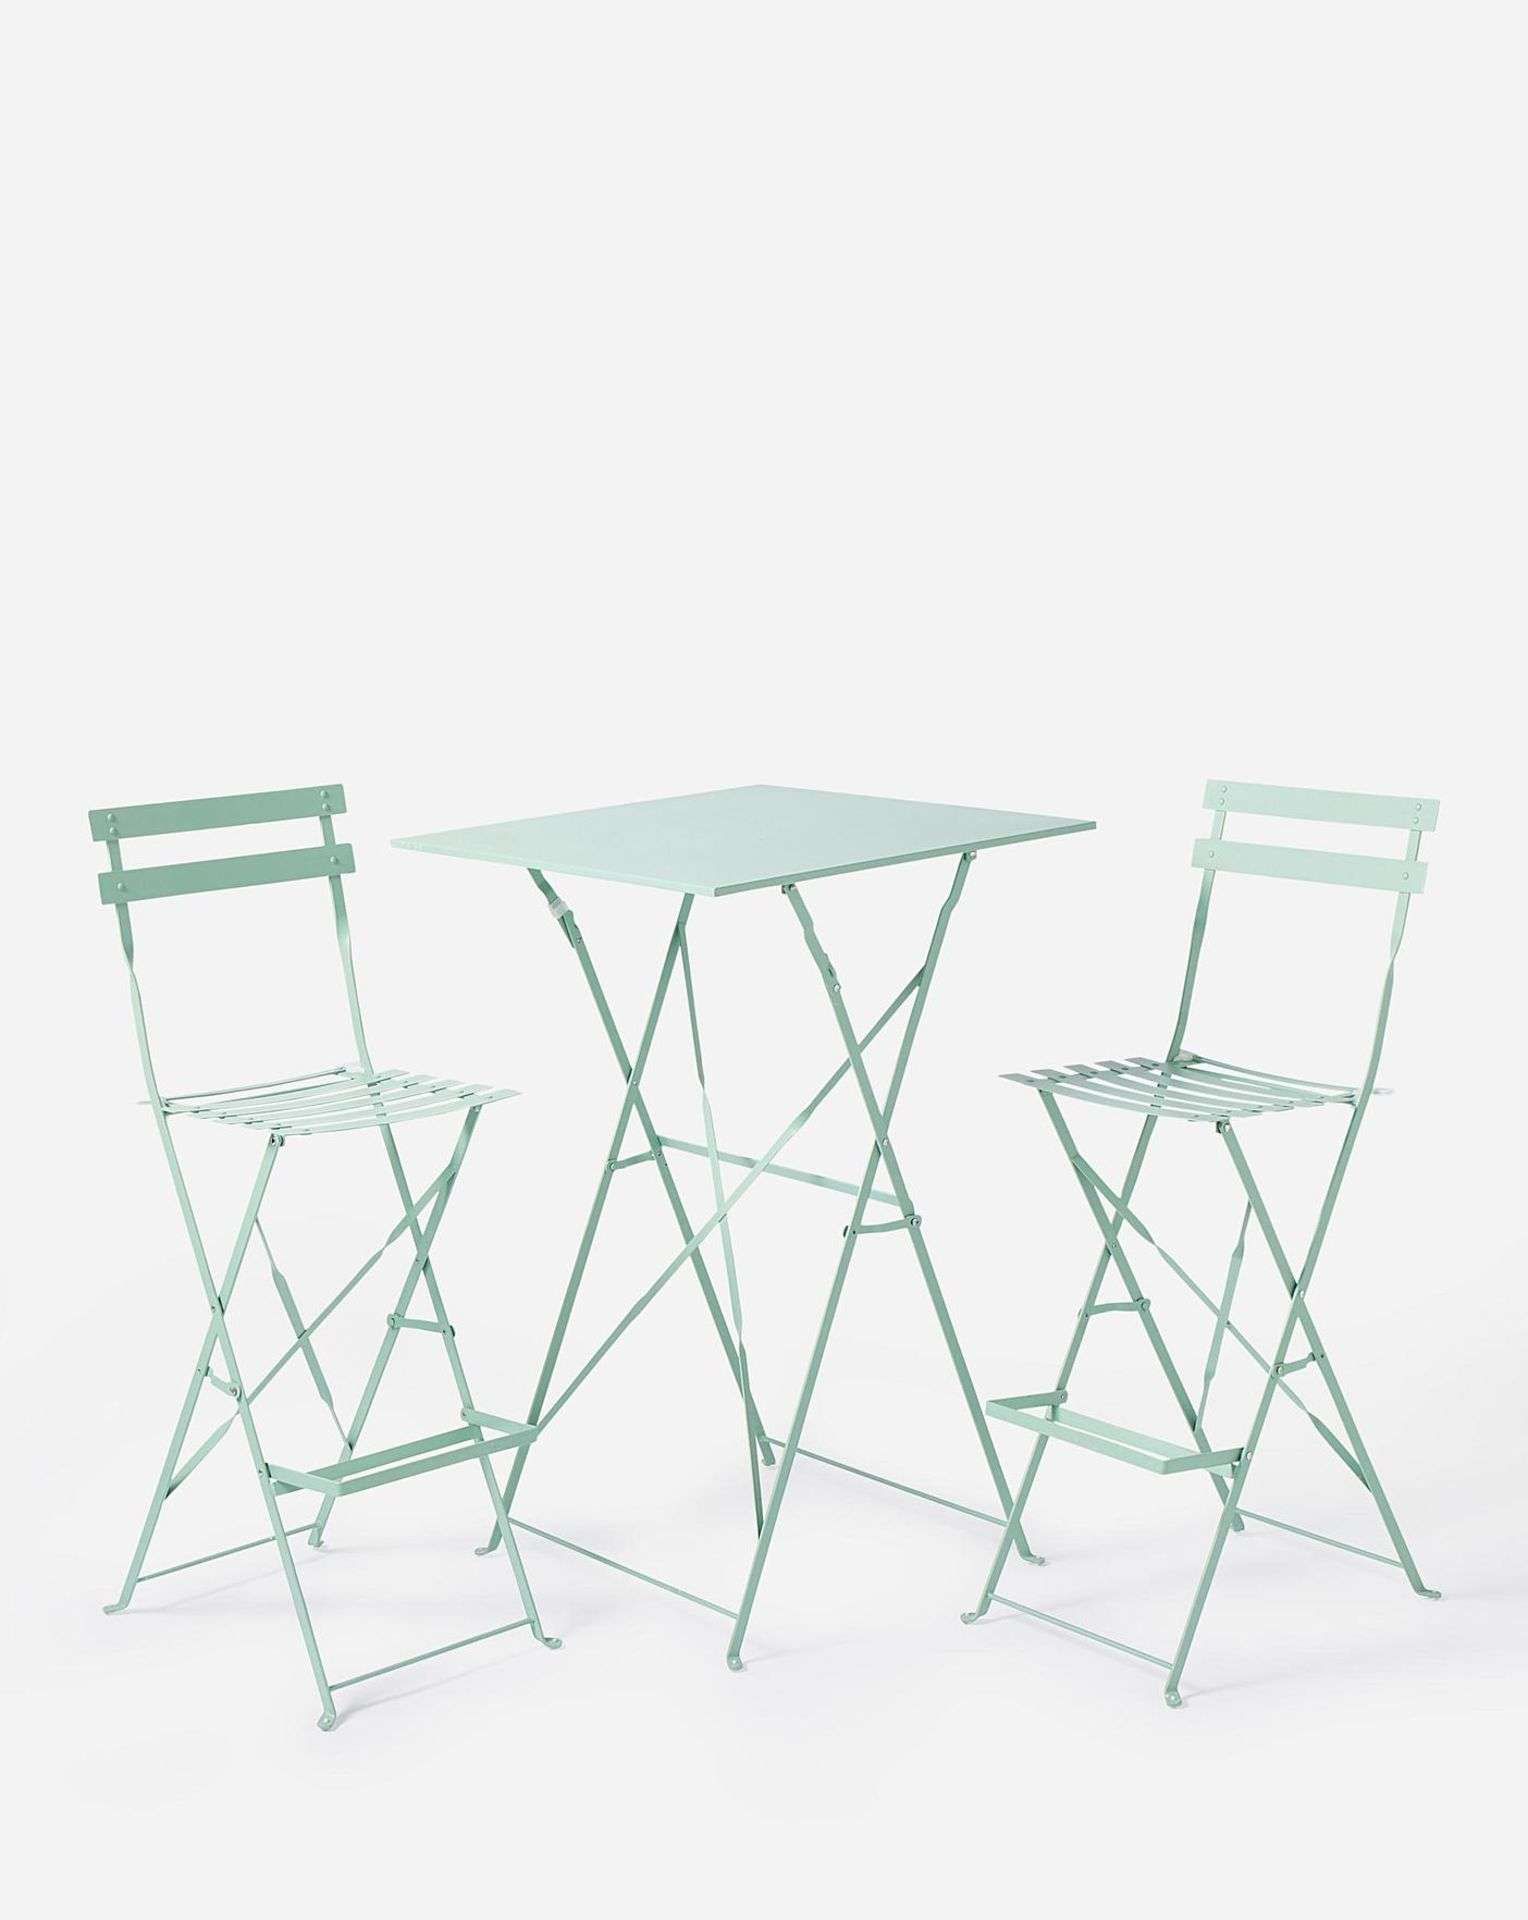 BRAND NEW Palma Bistro Bar Set GREEN. RRP £159 EACH. Liven up your - Image 2 of 3